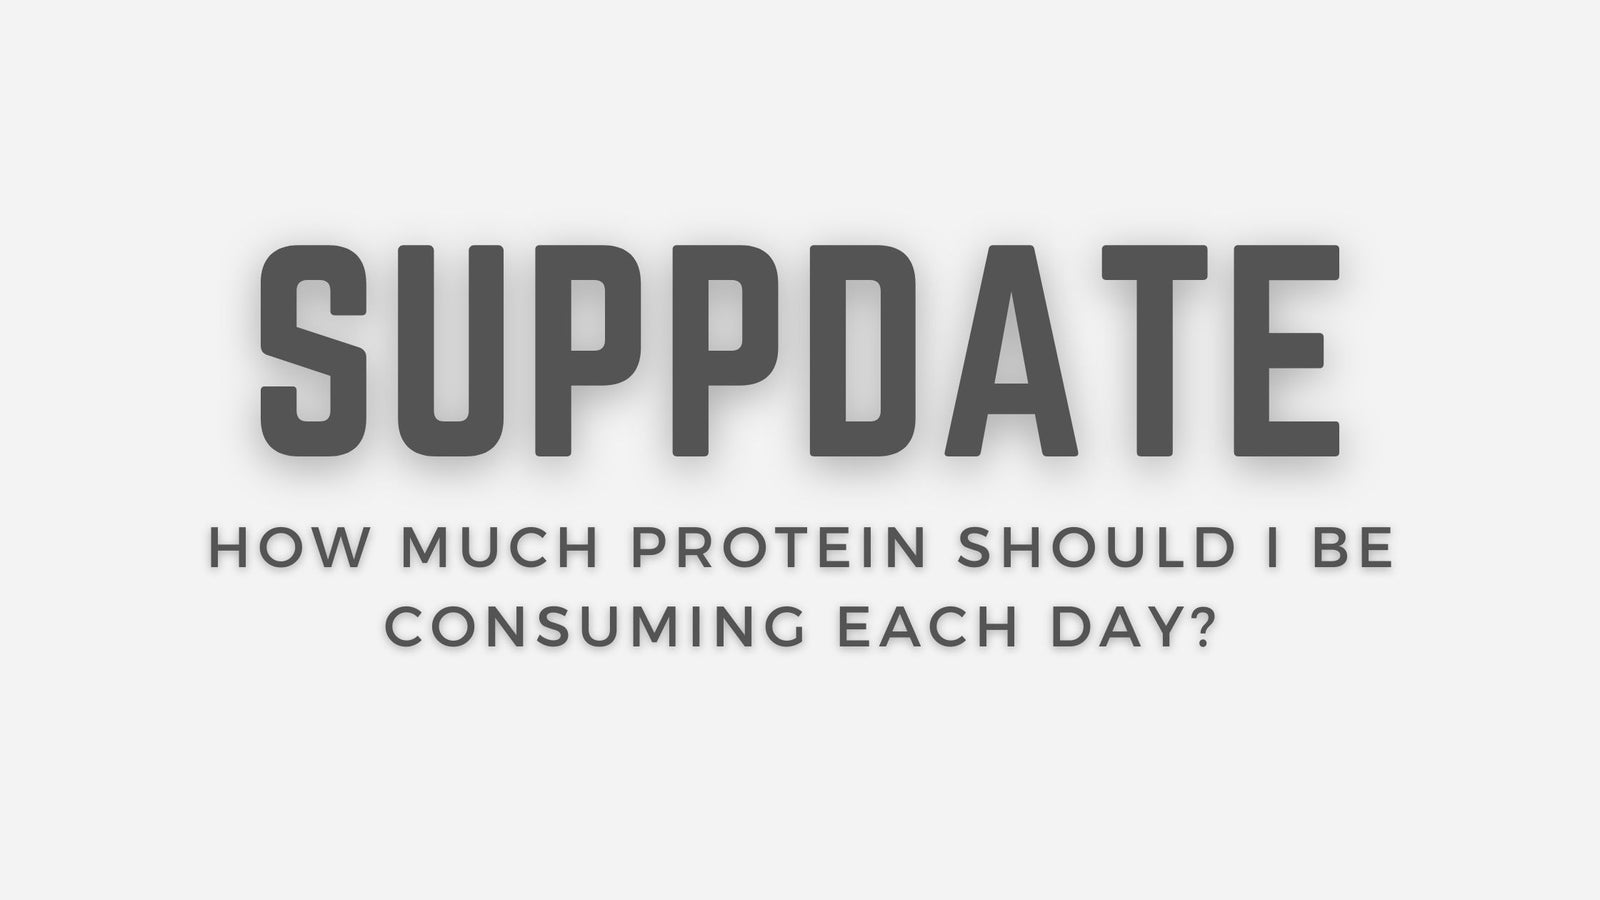 How Much Protein Should I Be Consuming Each Day? - The Supps House LTD